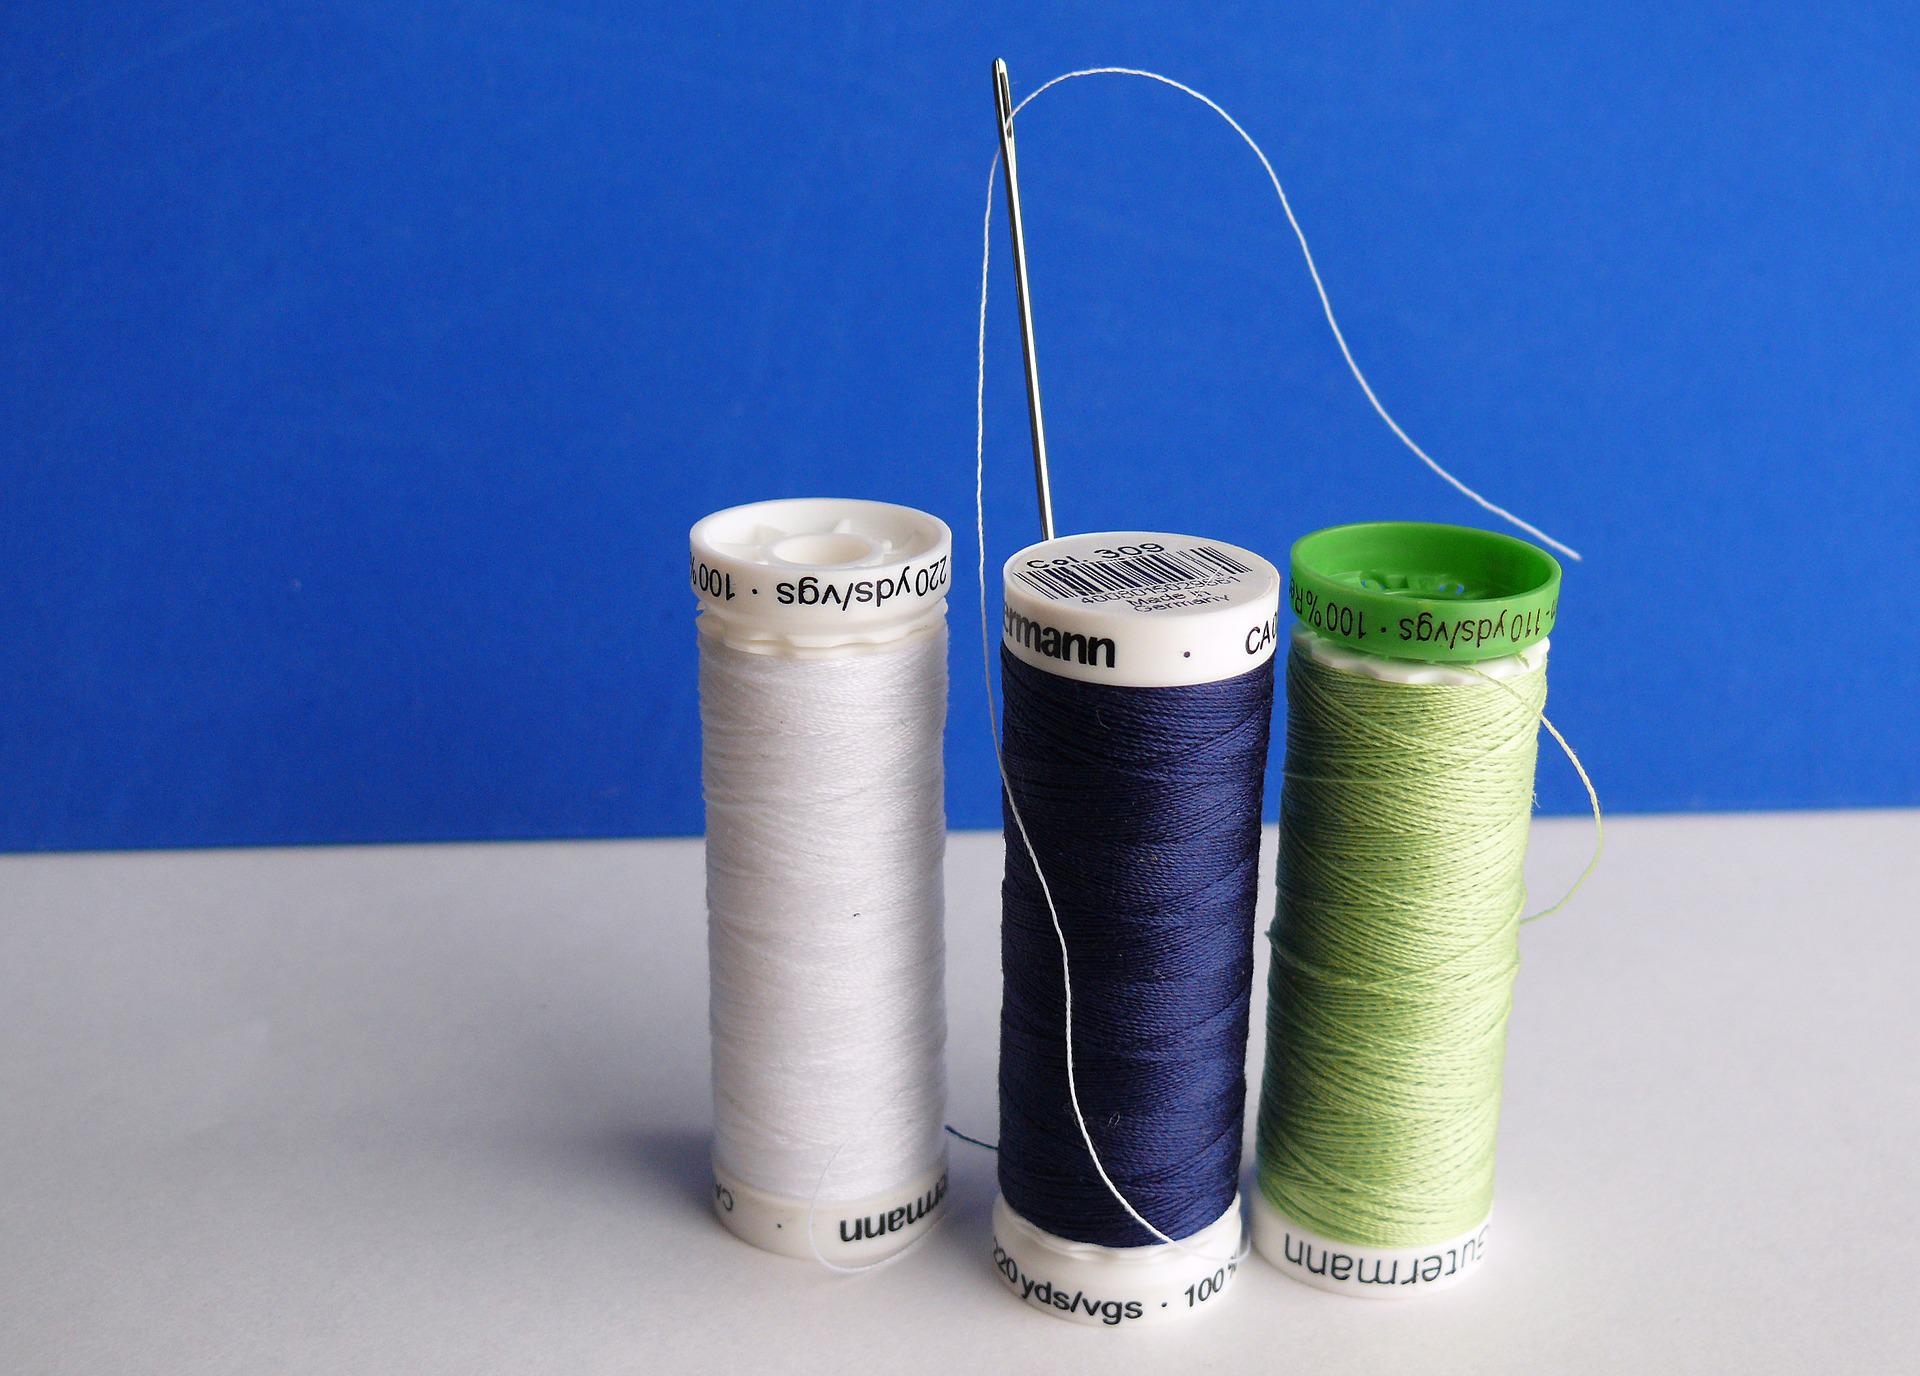 3 spools of cotton thread in navy blue, green and white with a sewing needle